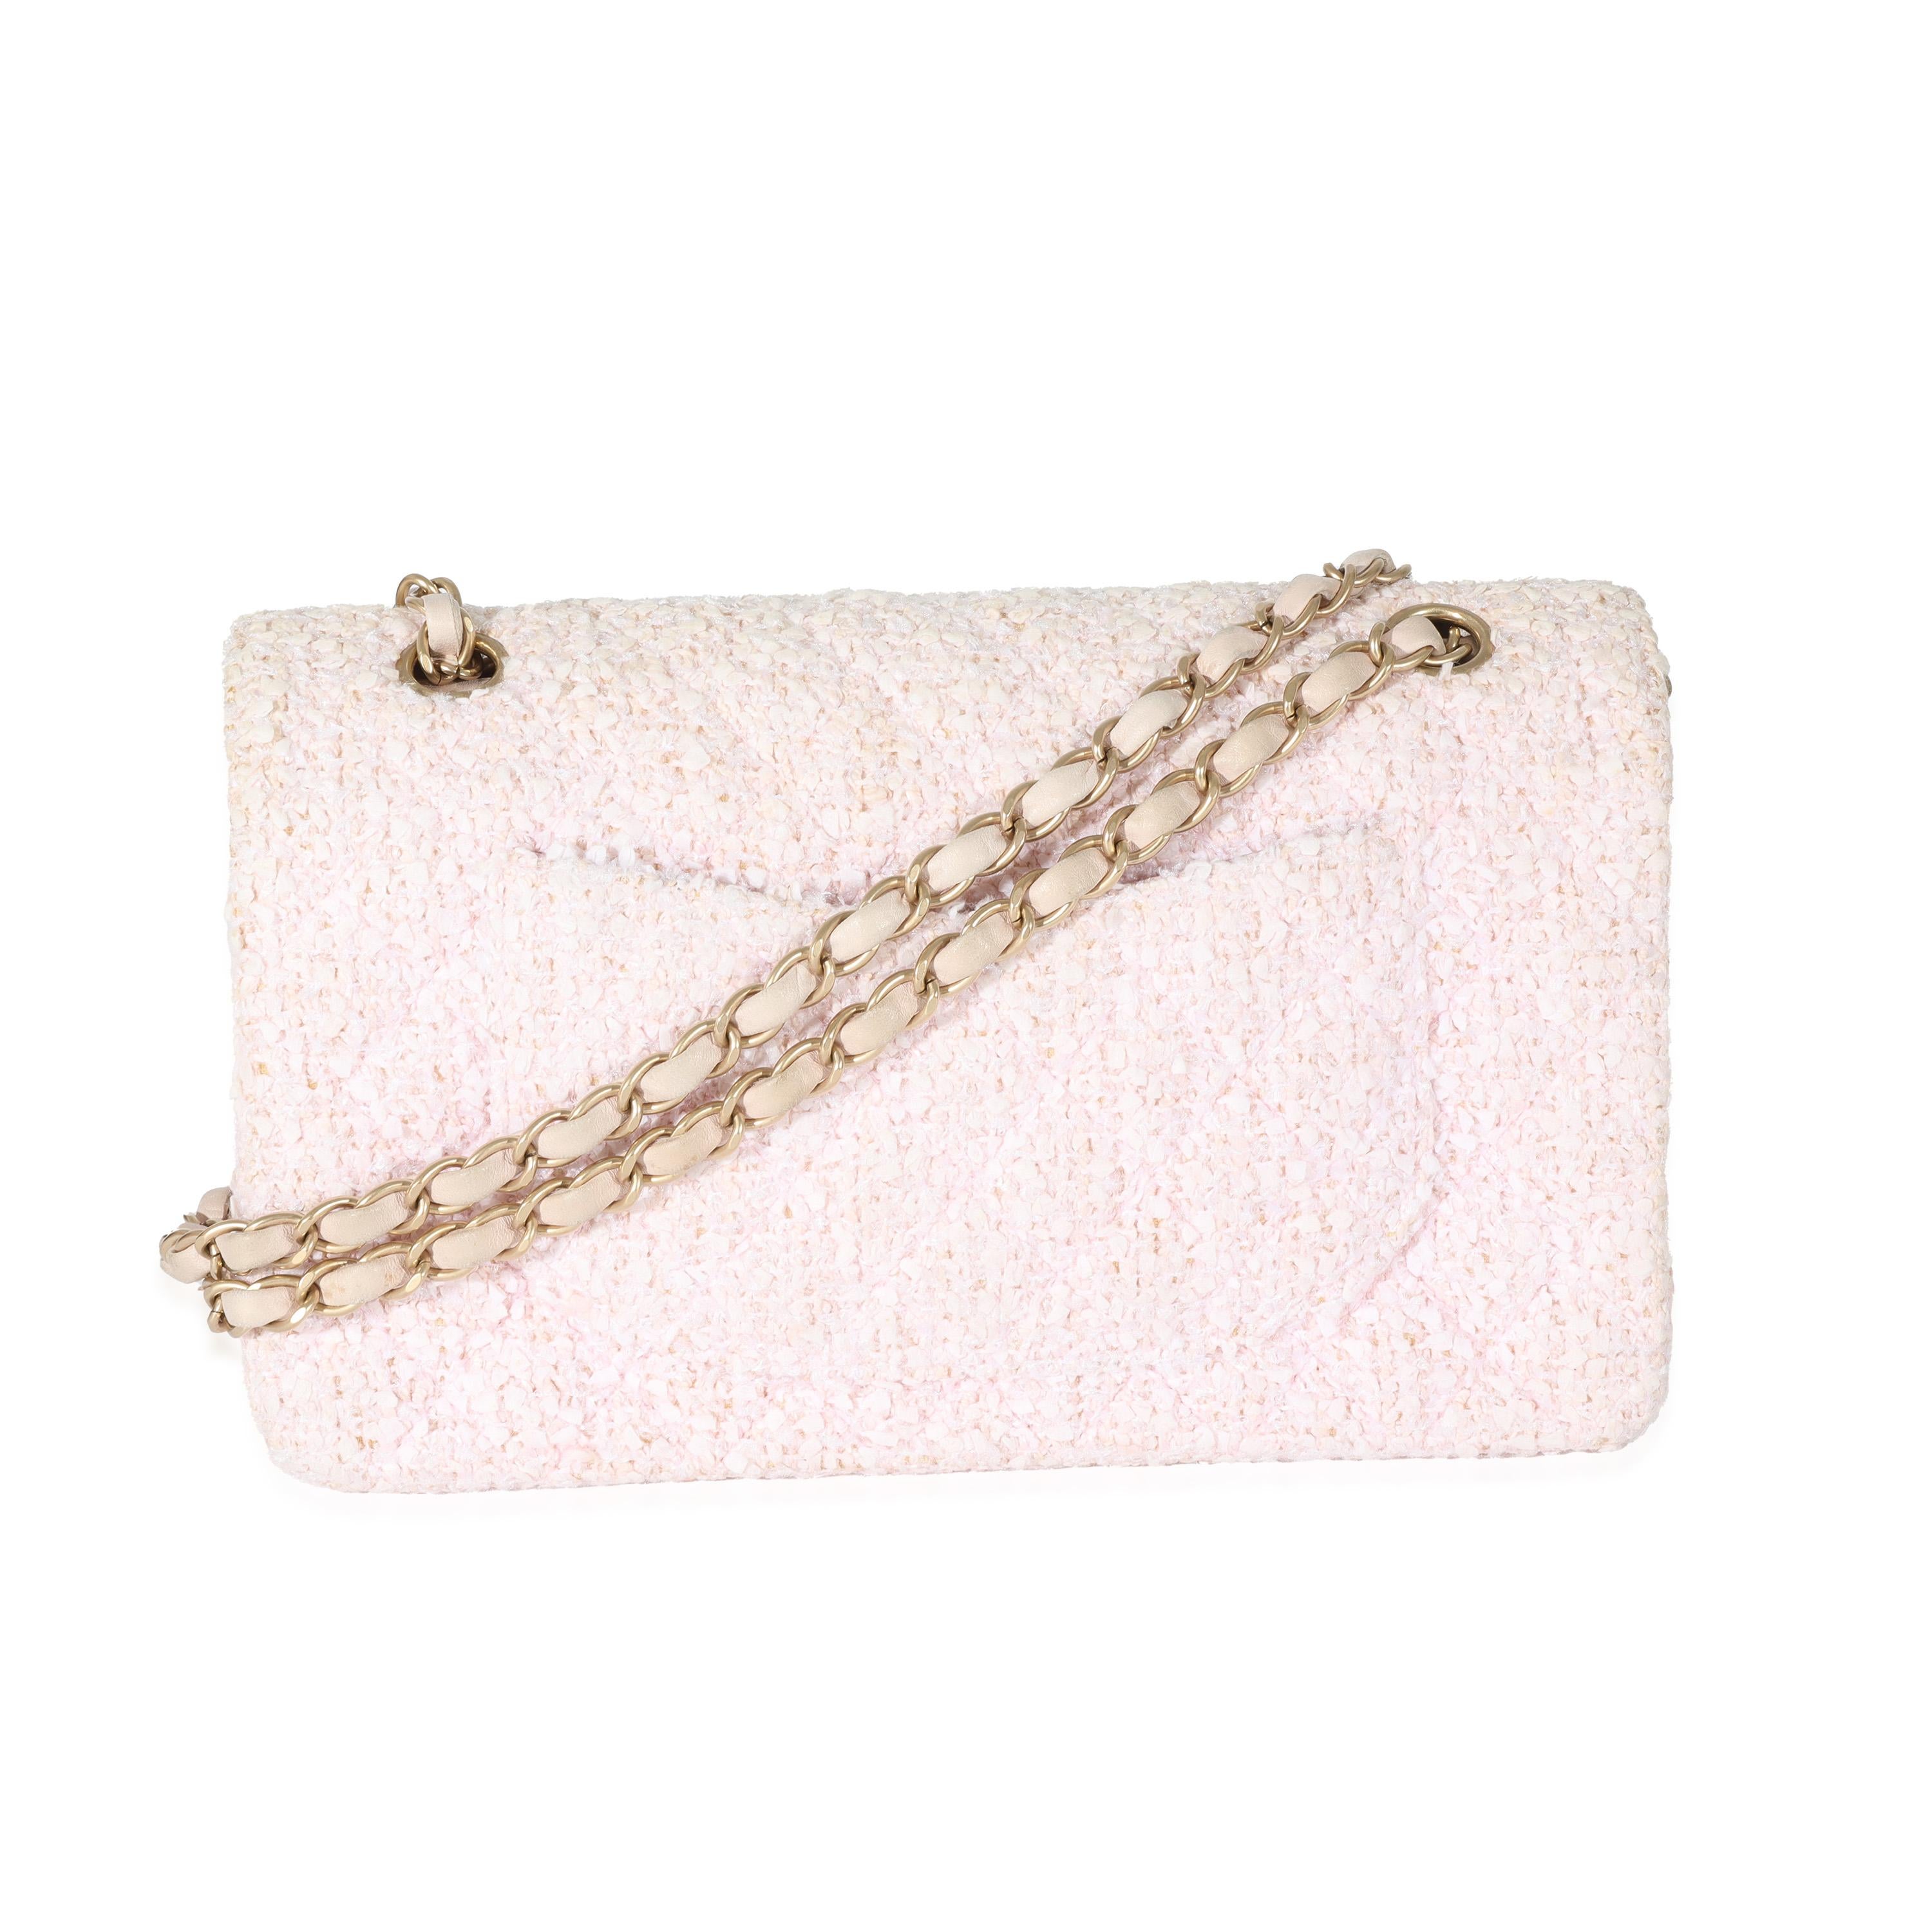 Chanel Pink Tweed Medium Classic Double Flap Bag In Excellent Condition For Sale In New York, NY